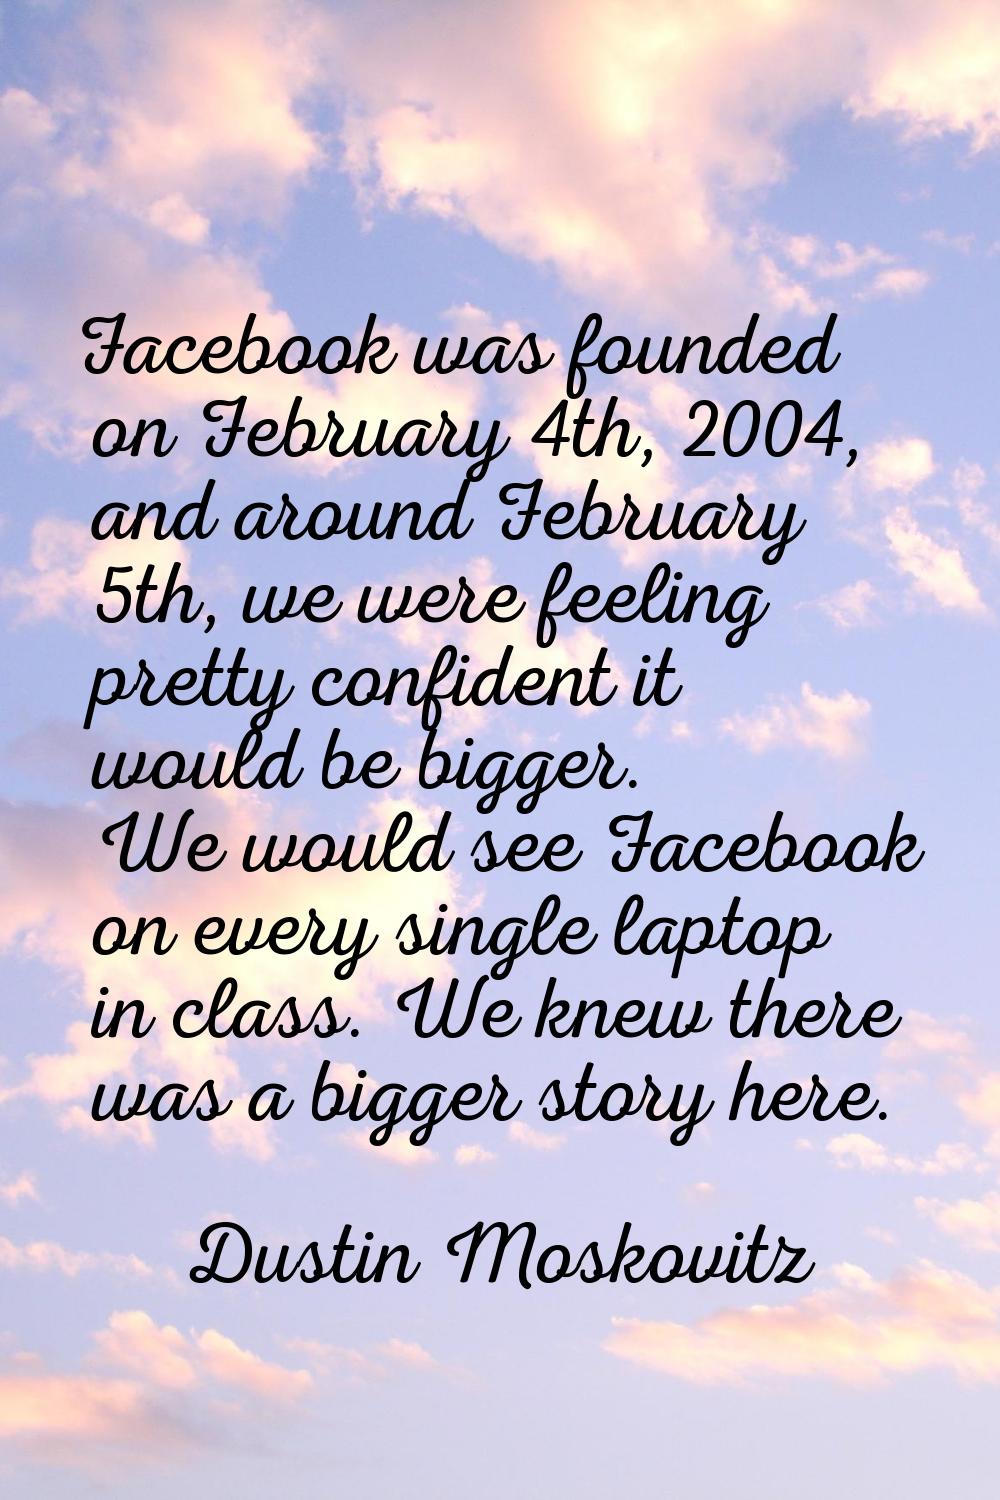 Facebook was founded on February 4th, 2004, and around February 5th, we were feeling pretty confide